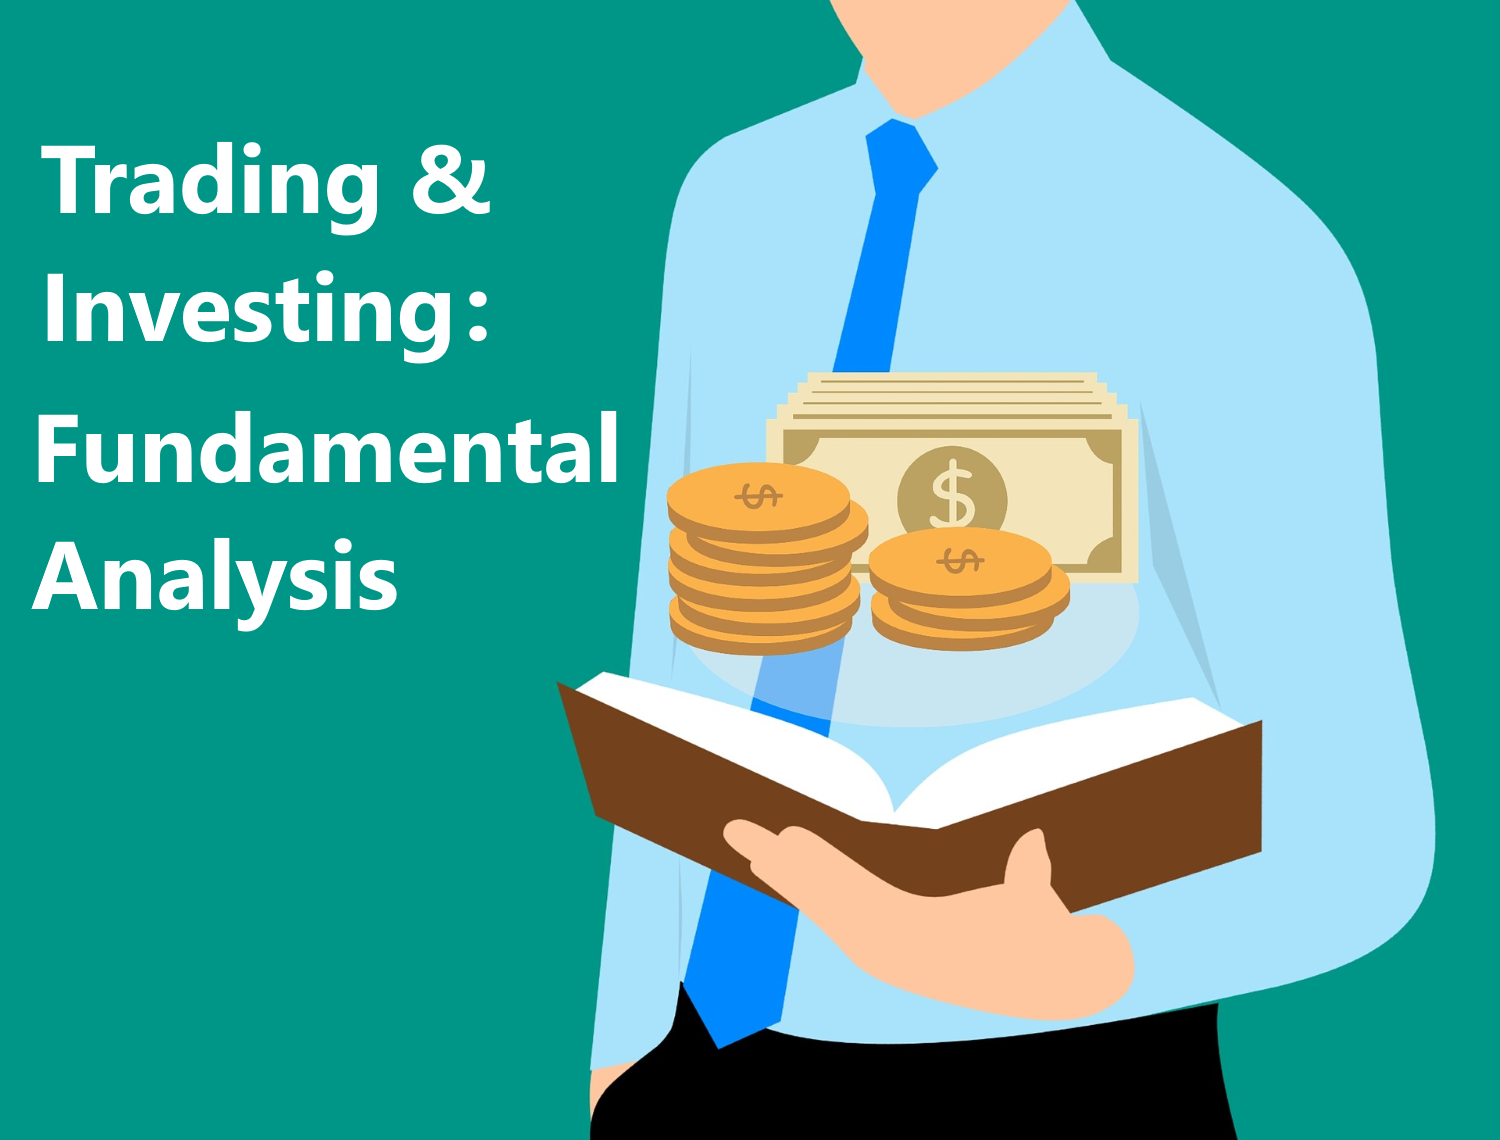 Fundamental Analysis is powerful method for investing nd trading stocks online.